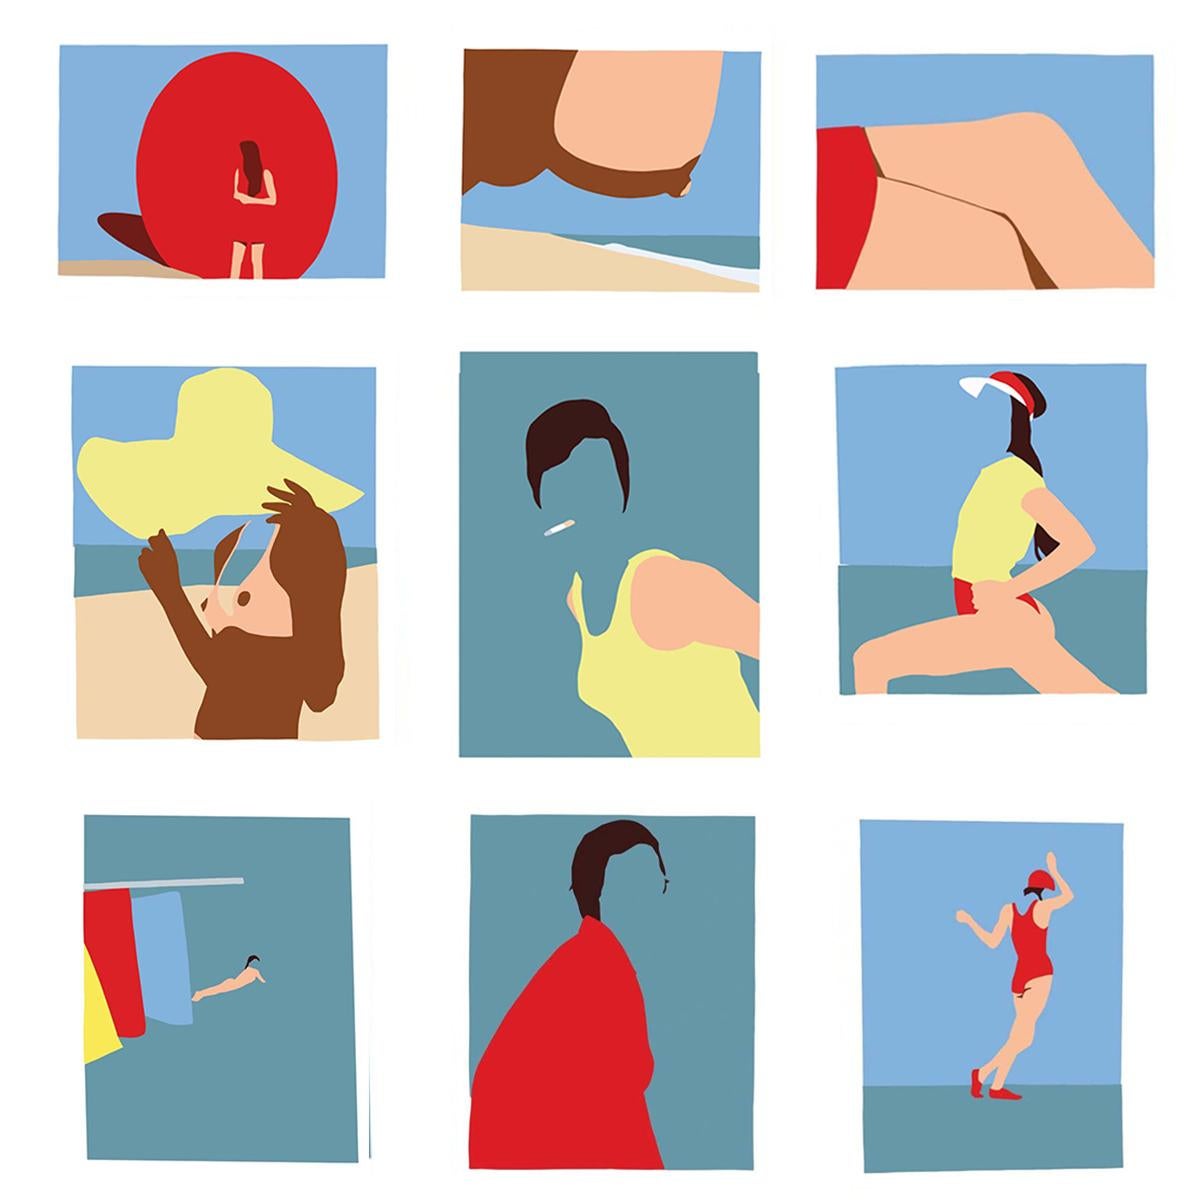 Casey Waterman Figurative Print - Set of 9. From the Series "Why This Restlessness?" Figurative prints